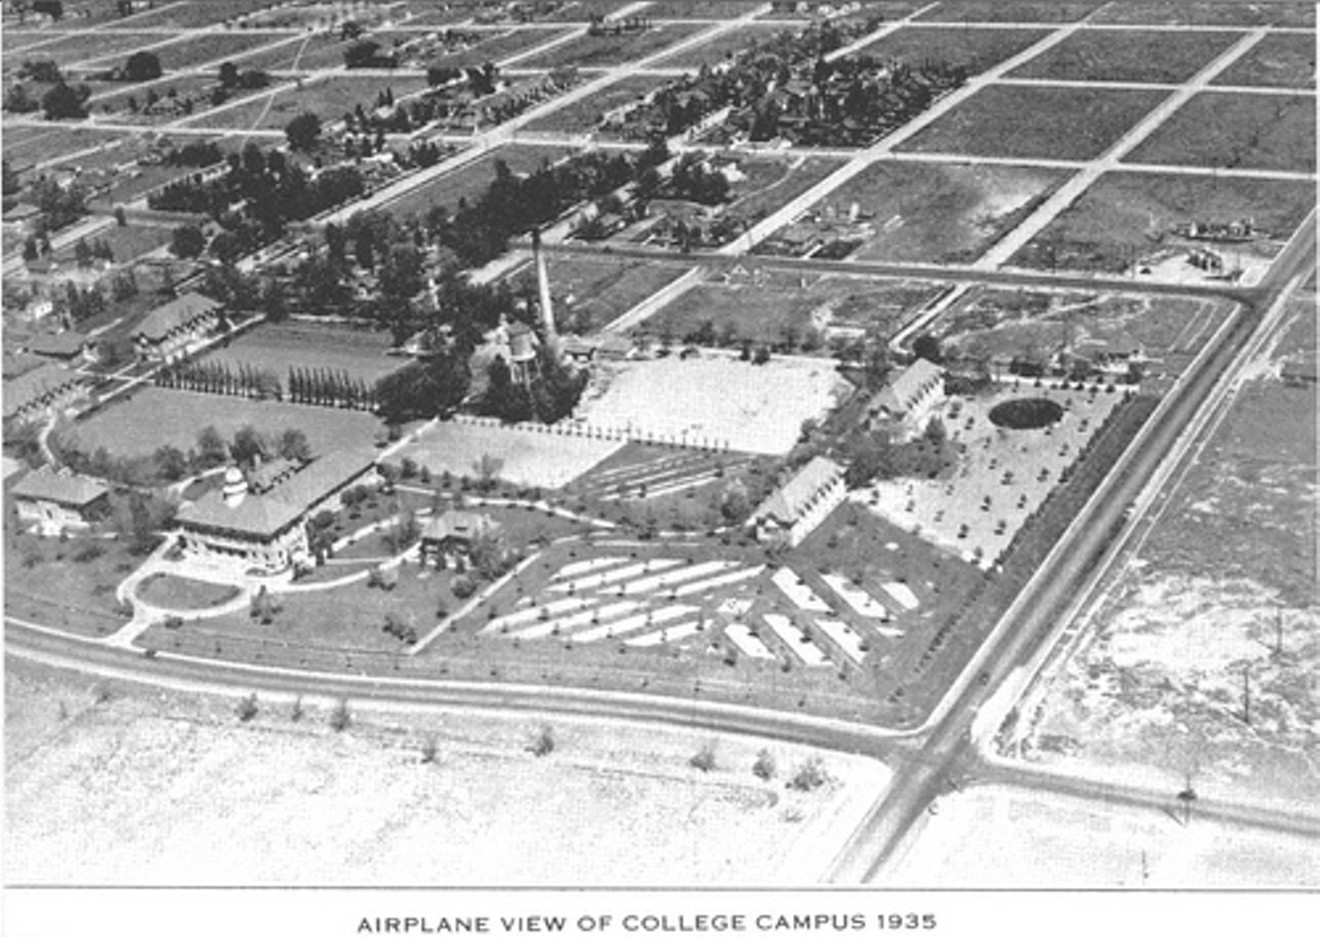 The historic Clayton College campus in 1935.